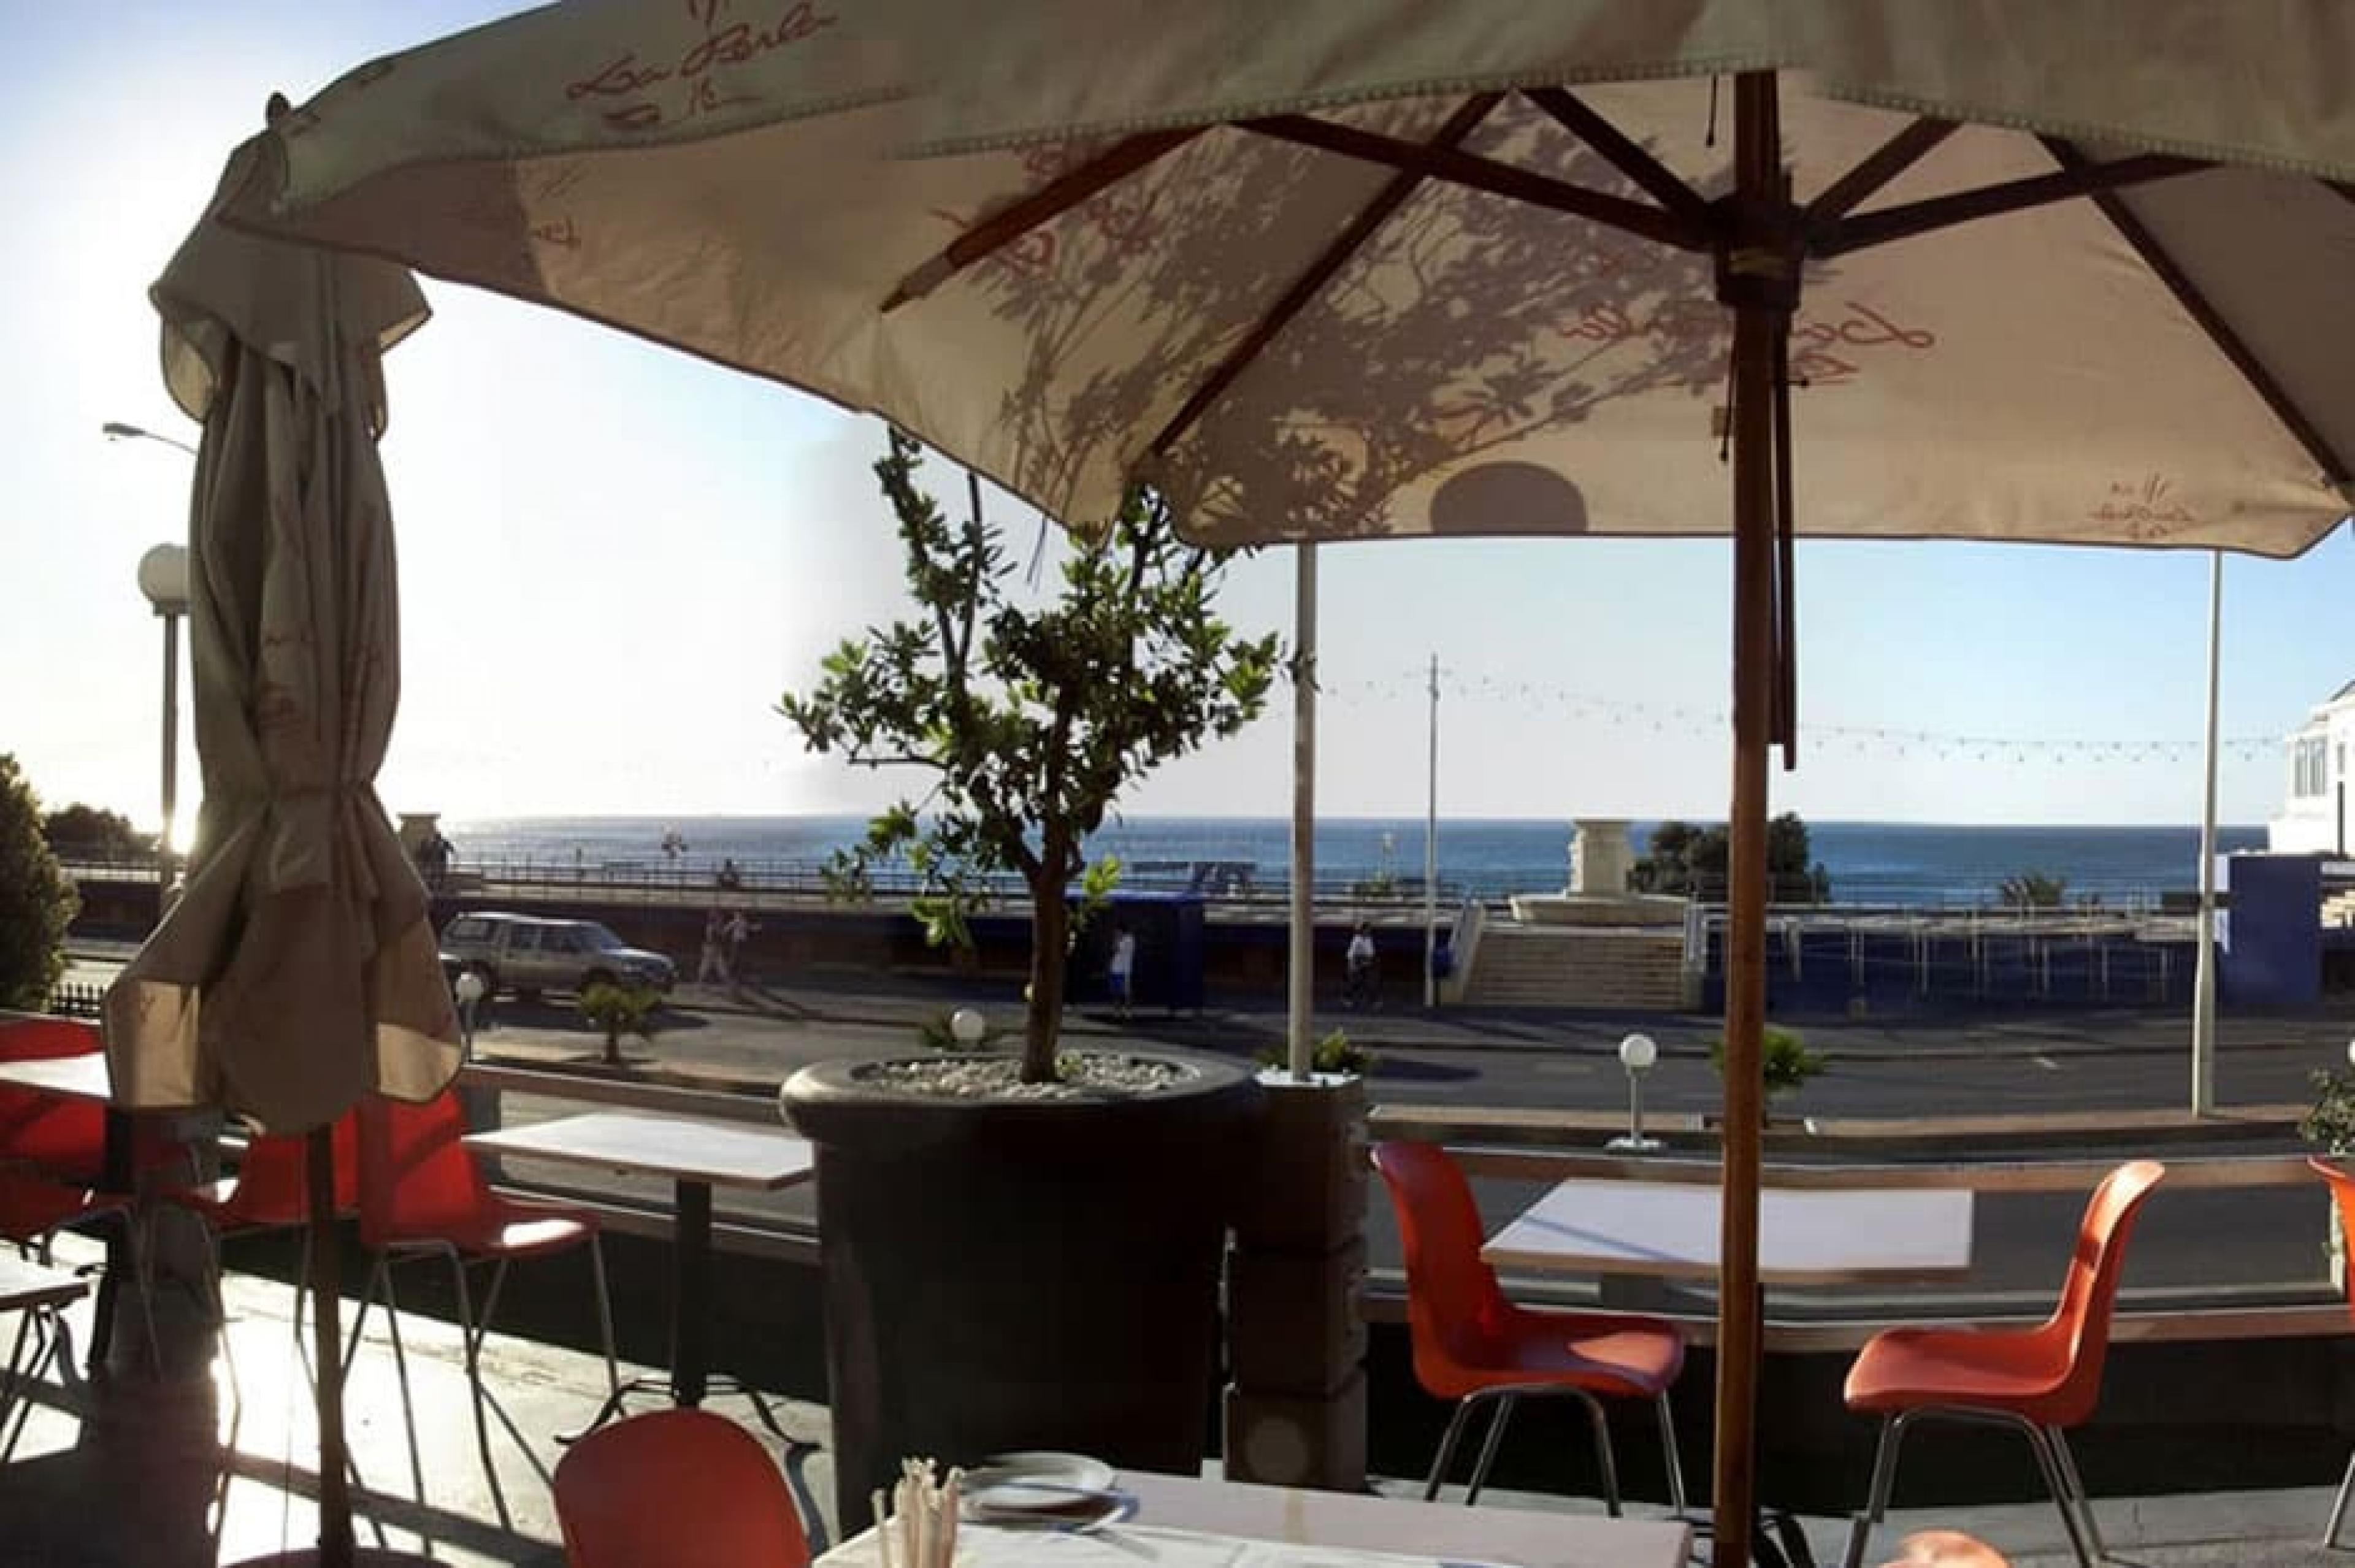 Dinning Area at La Perla, Cape Town, South Africa